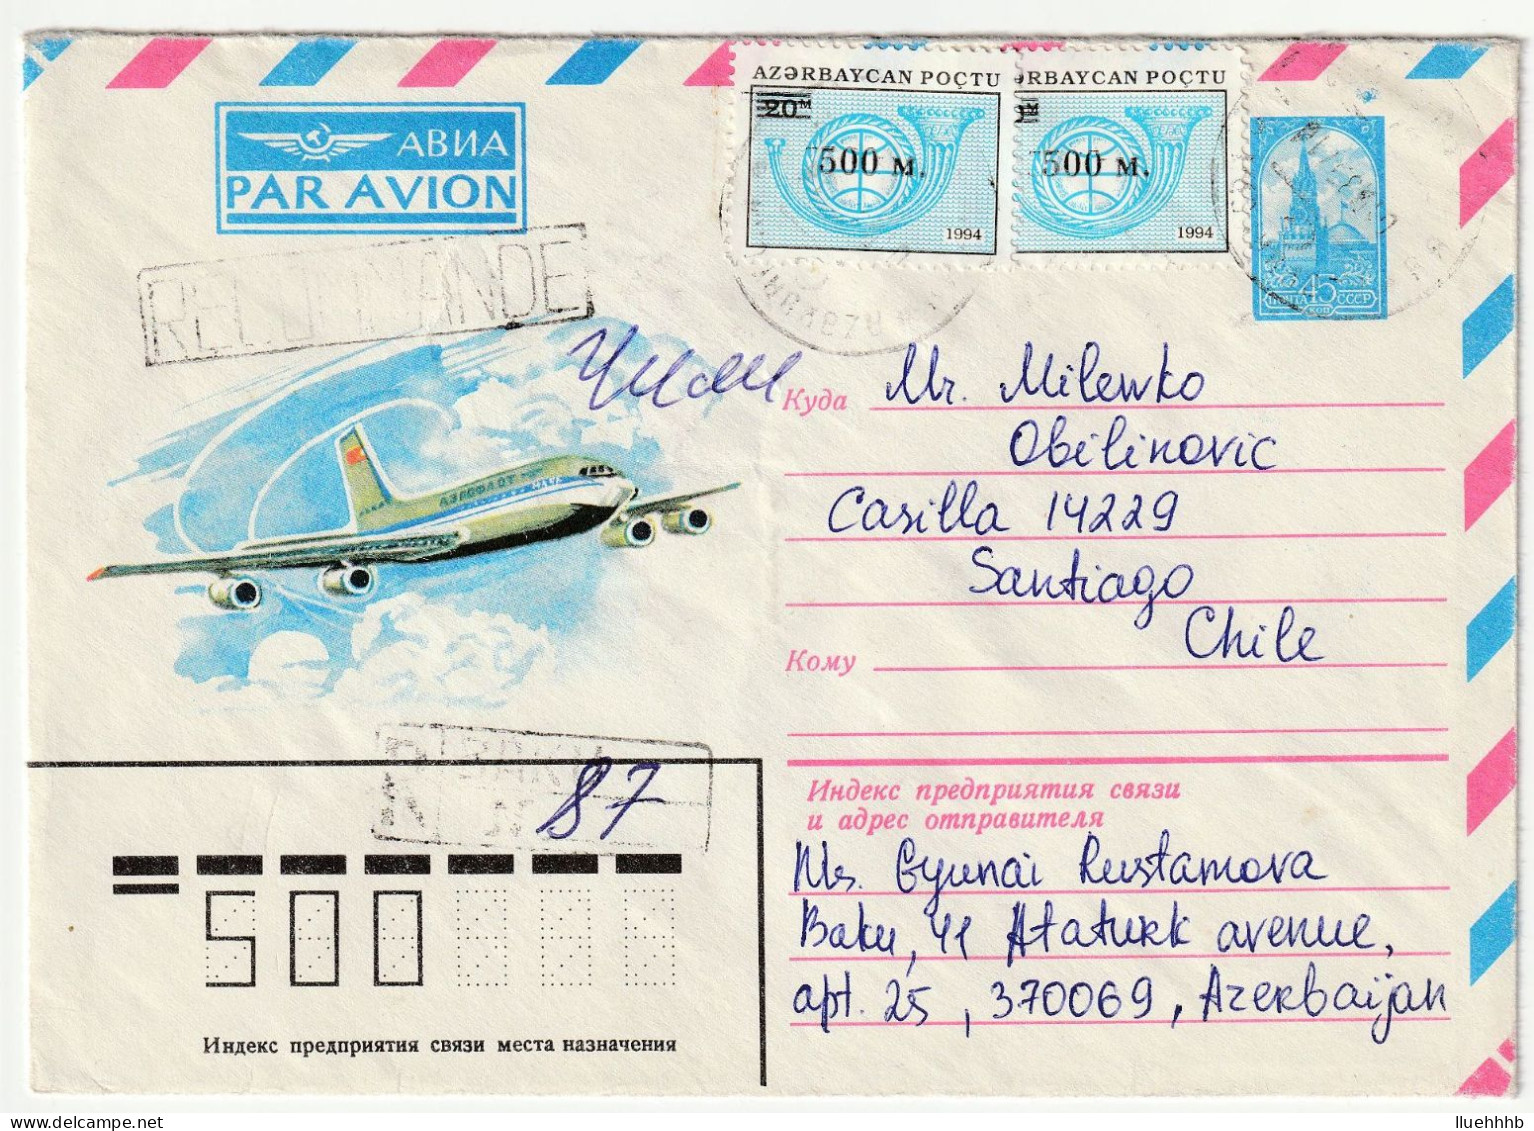 AZERBAIJAN: 1997 Registered Airmail USSR Stationery Cover To CHILE - Aserbaidschan